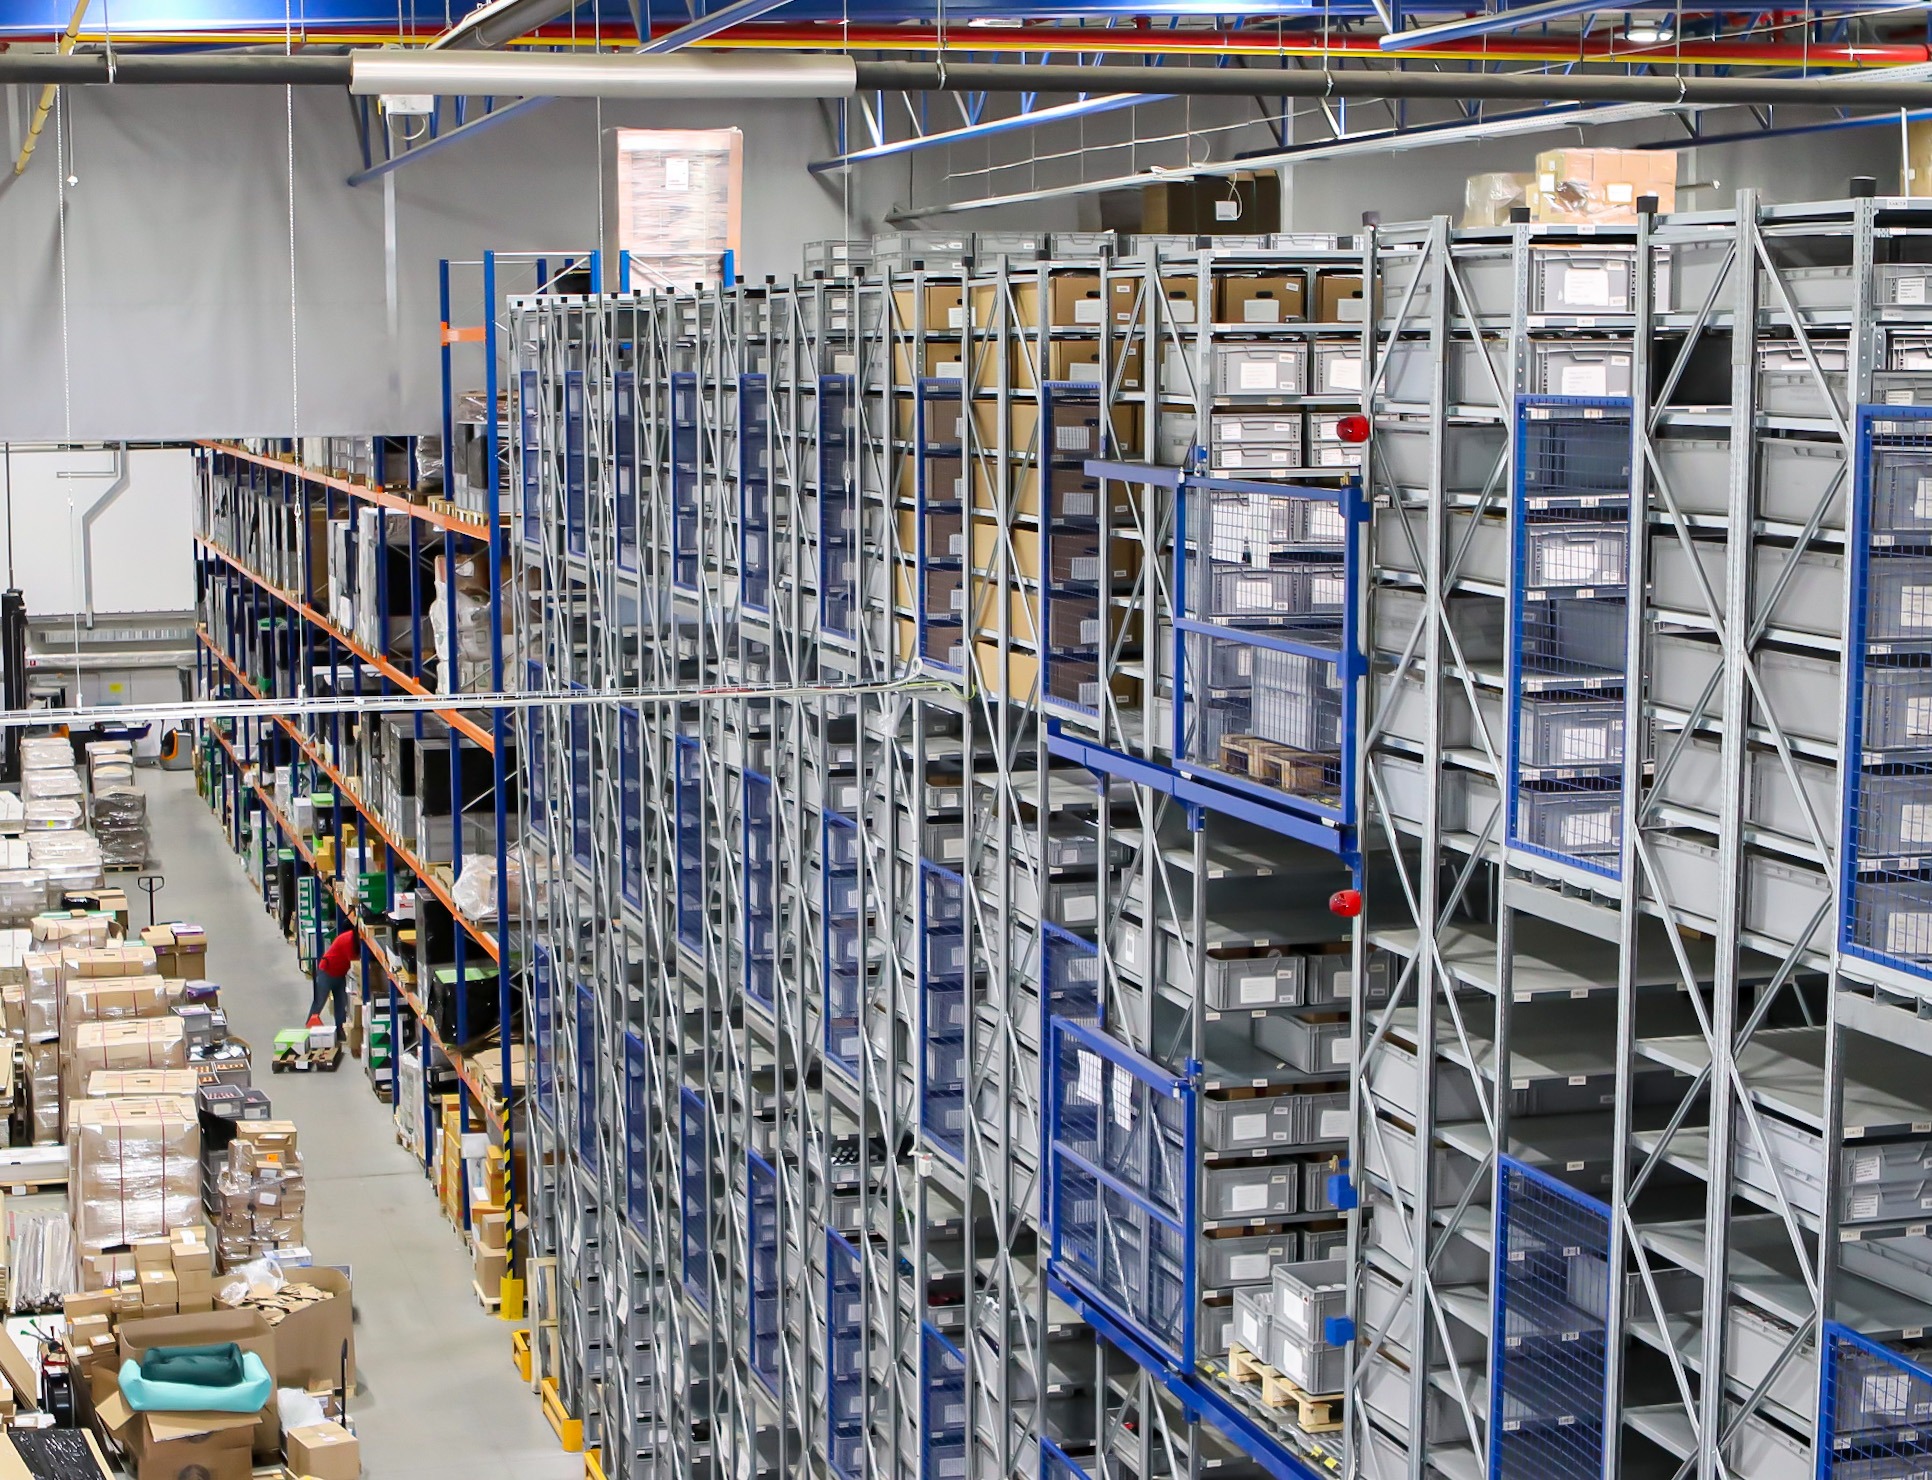 plans more warehouses and higher headcount in Europe